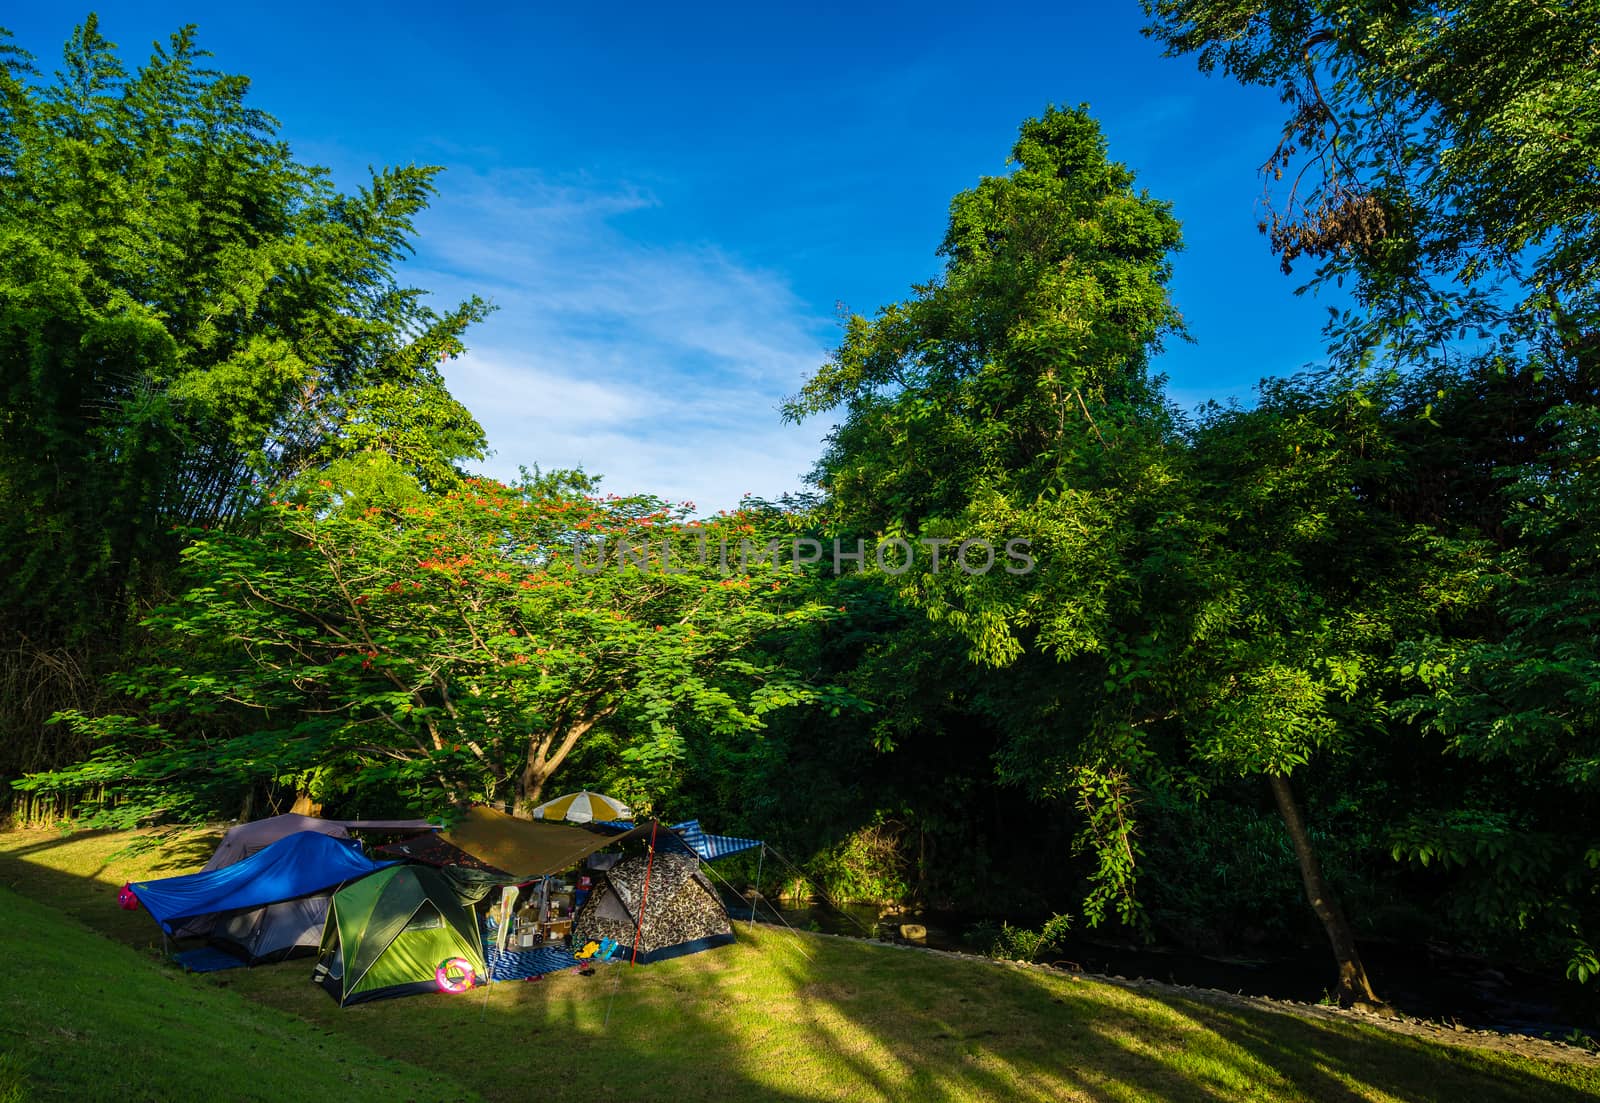 Camping and tent in nature park with blue sky by domonite